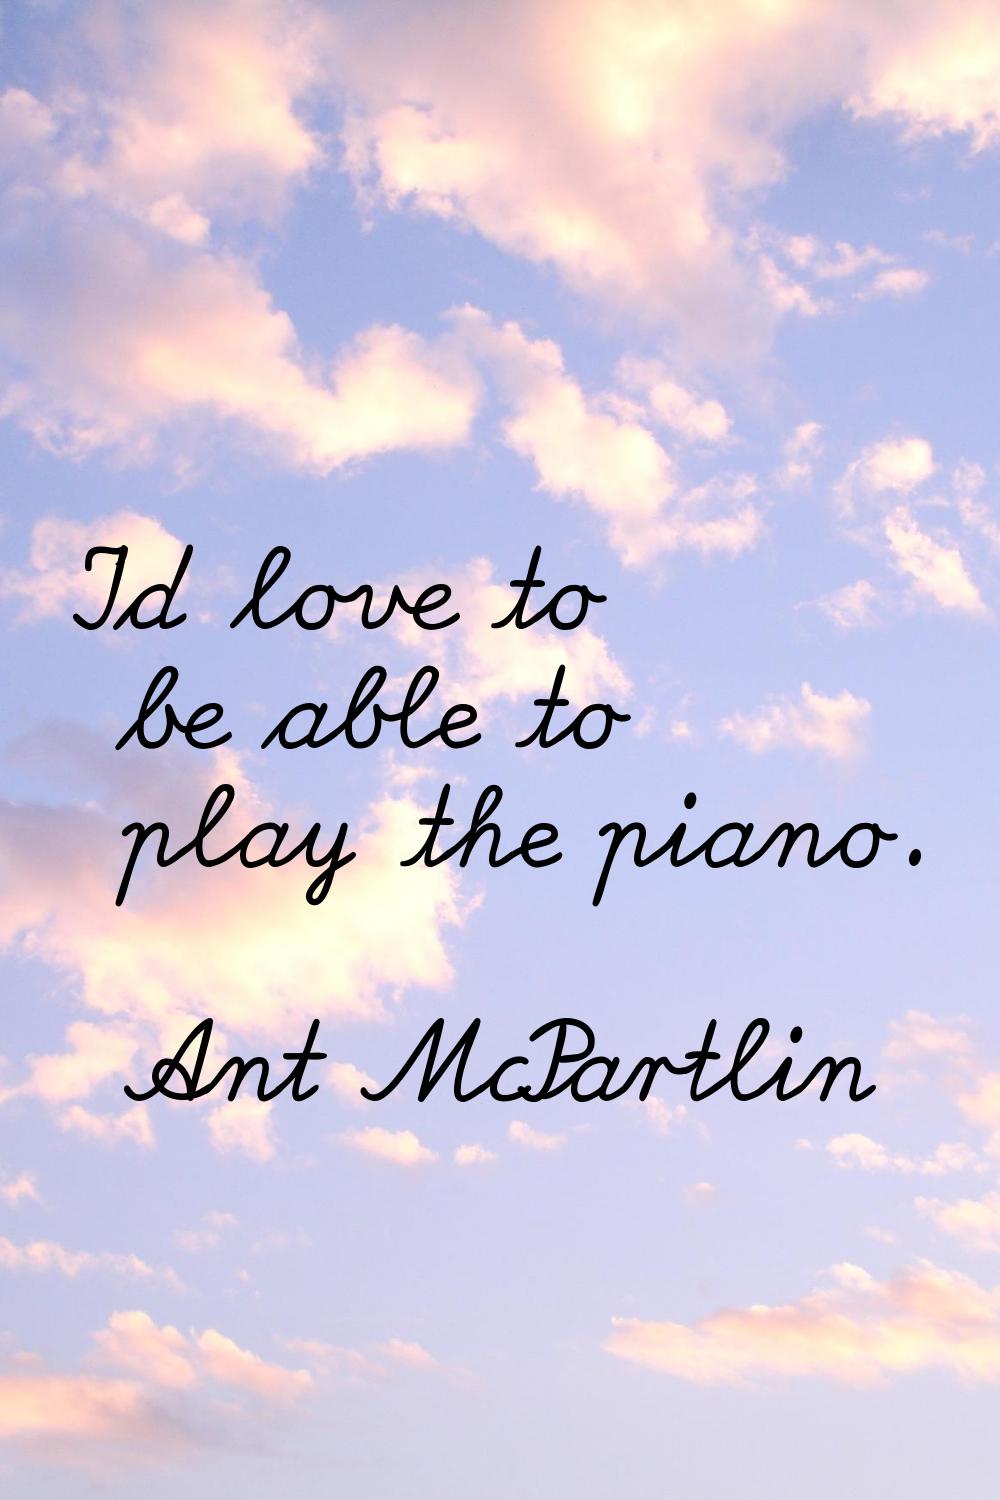 I'd love to be able to play the piano.